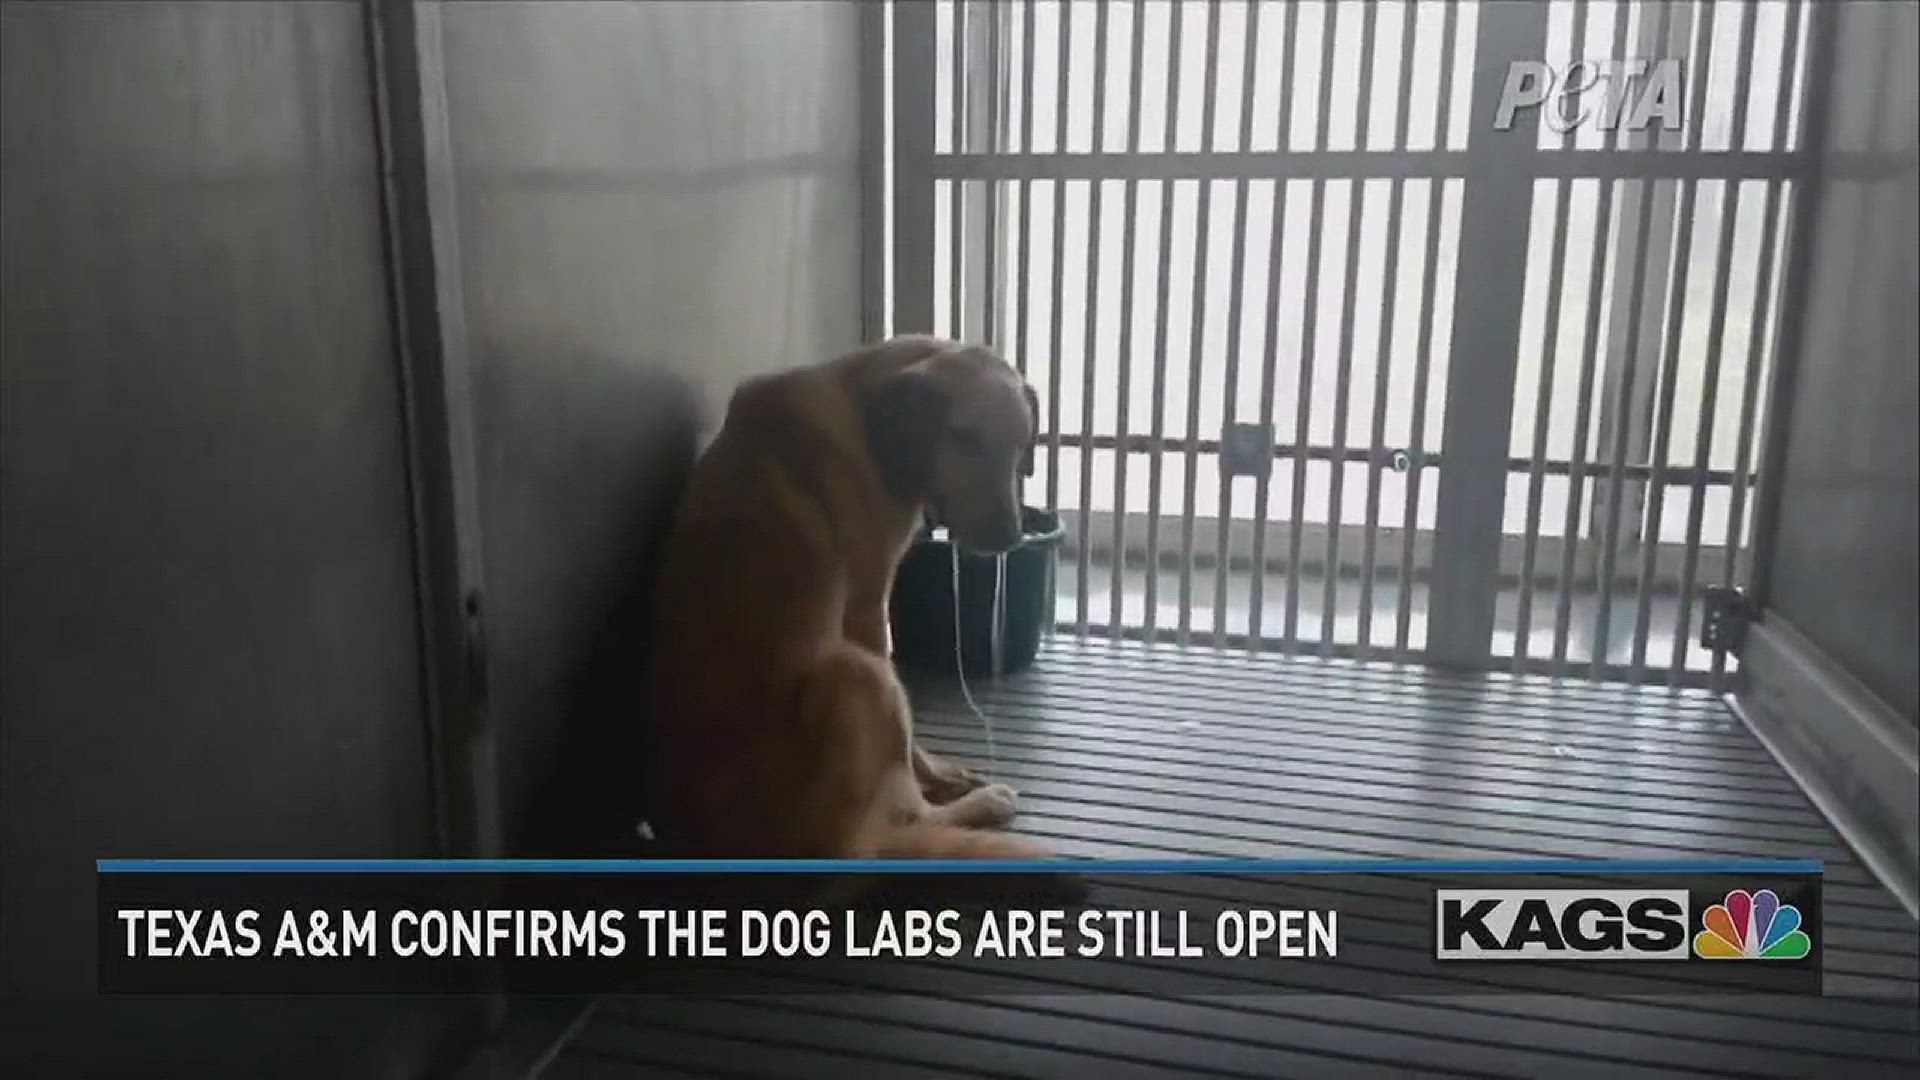 PETA recently reported controversial dog research labs had been closed. TAMU confirms the labs are still open.